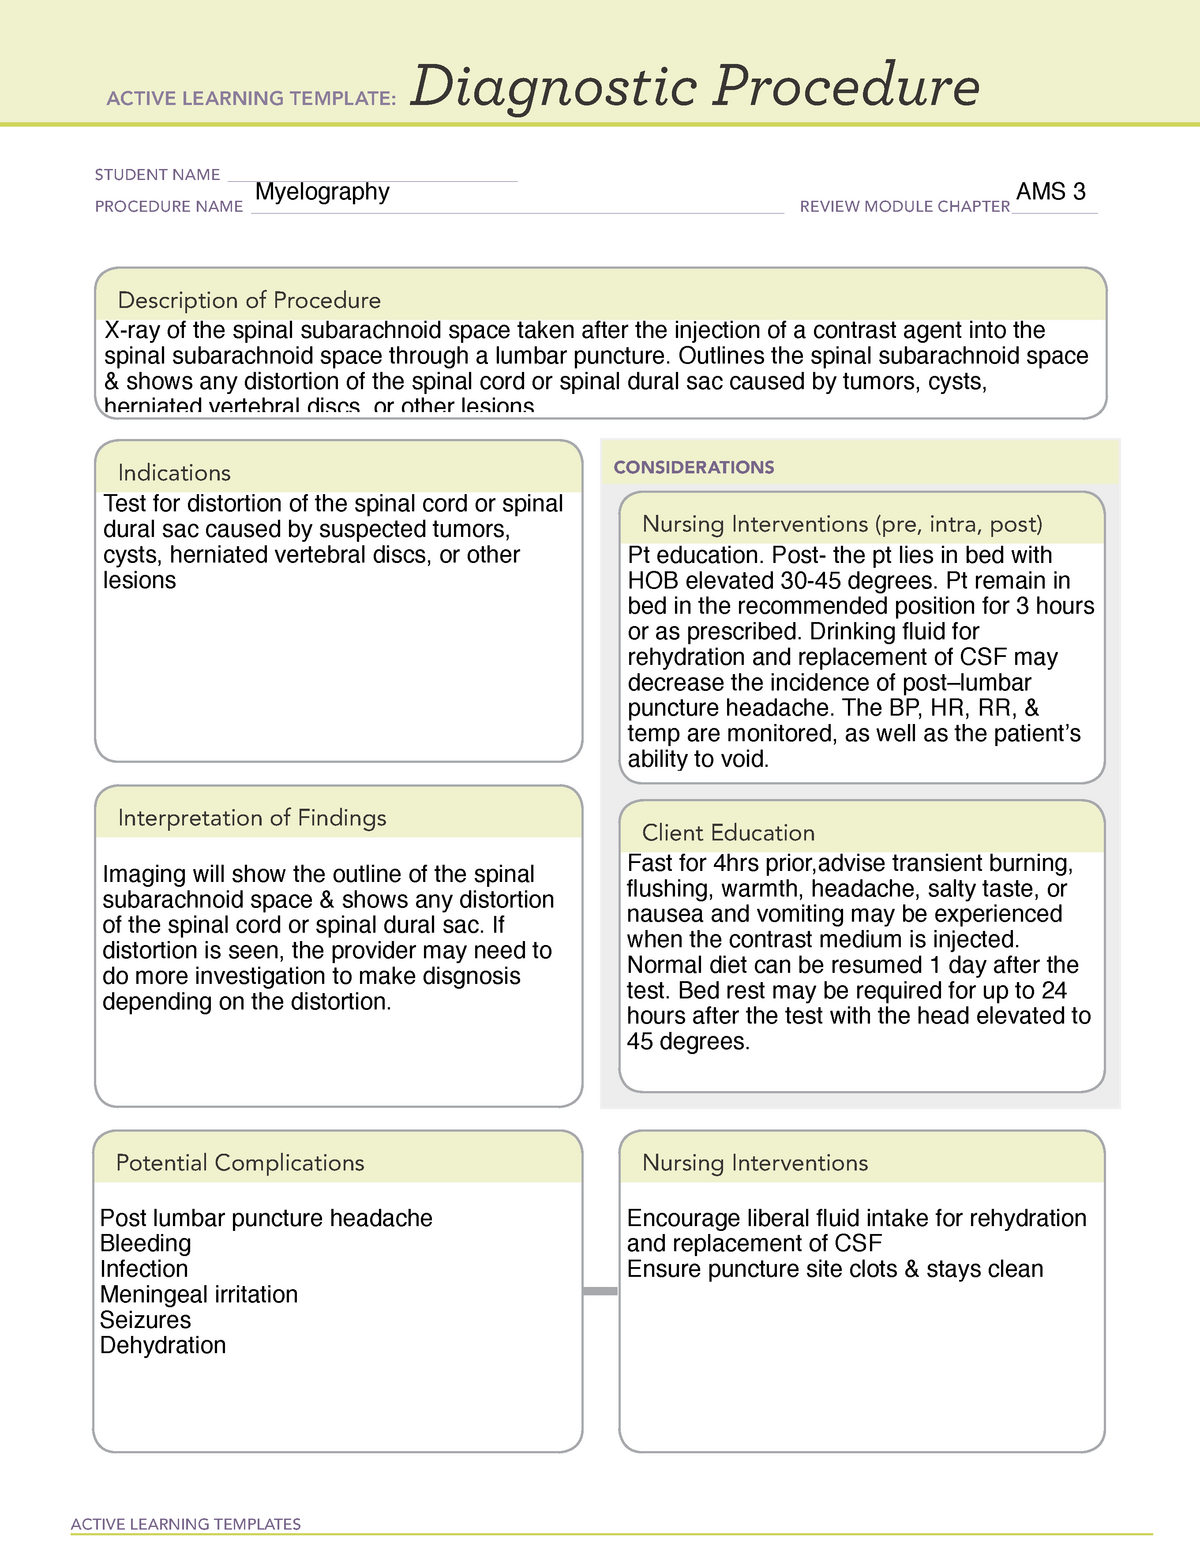 ATI Diagnostic Procedure Template Myelography - ACTIVE LEARNING With Regard To Lumbar Puncture Procedure Note Template